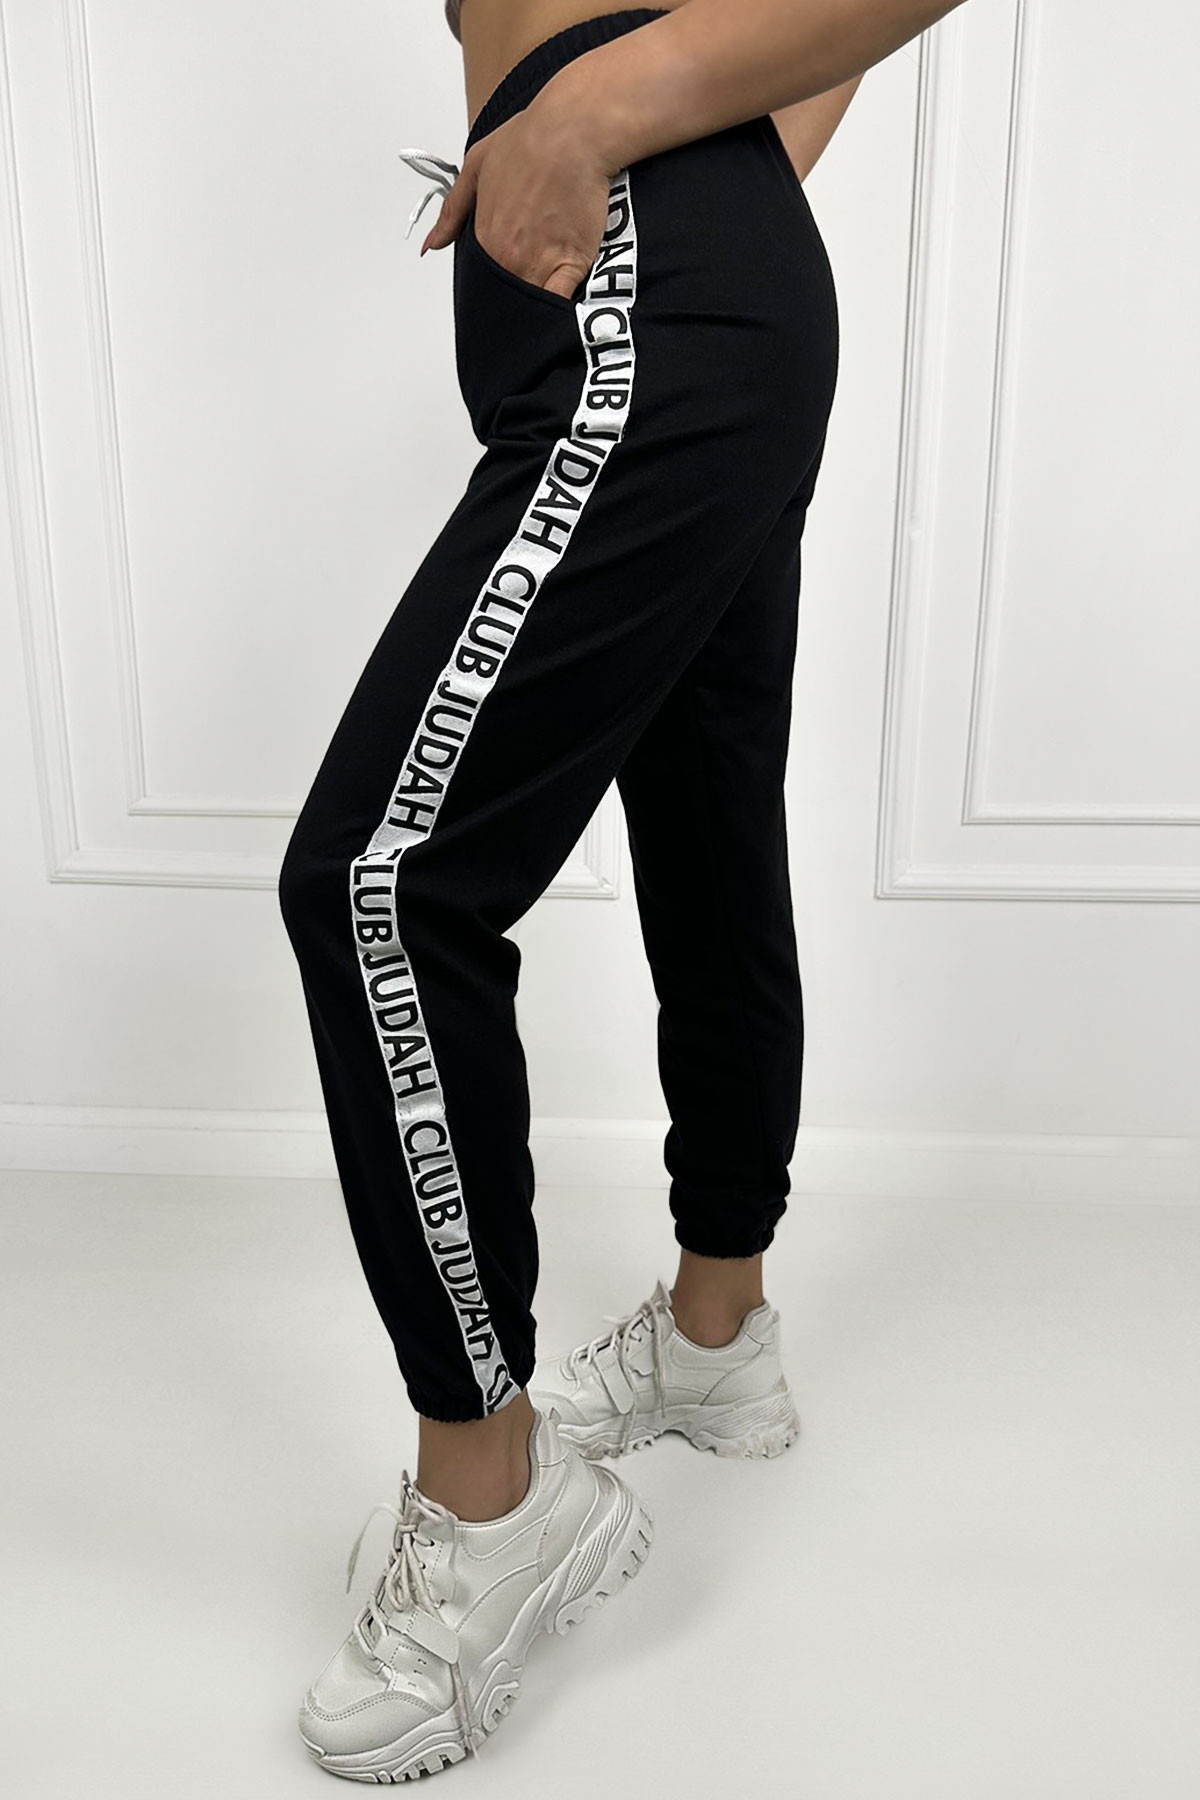 Womens sports pants with links   - Women's and men's